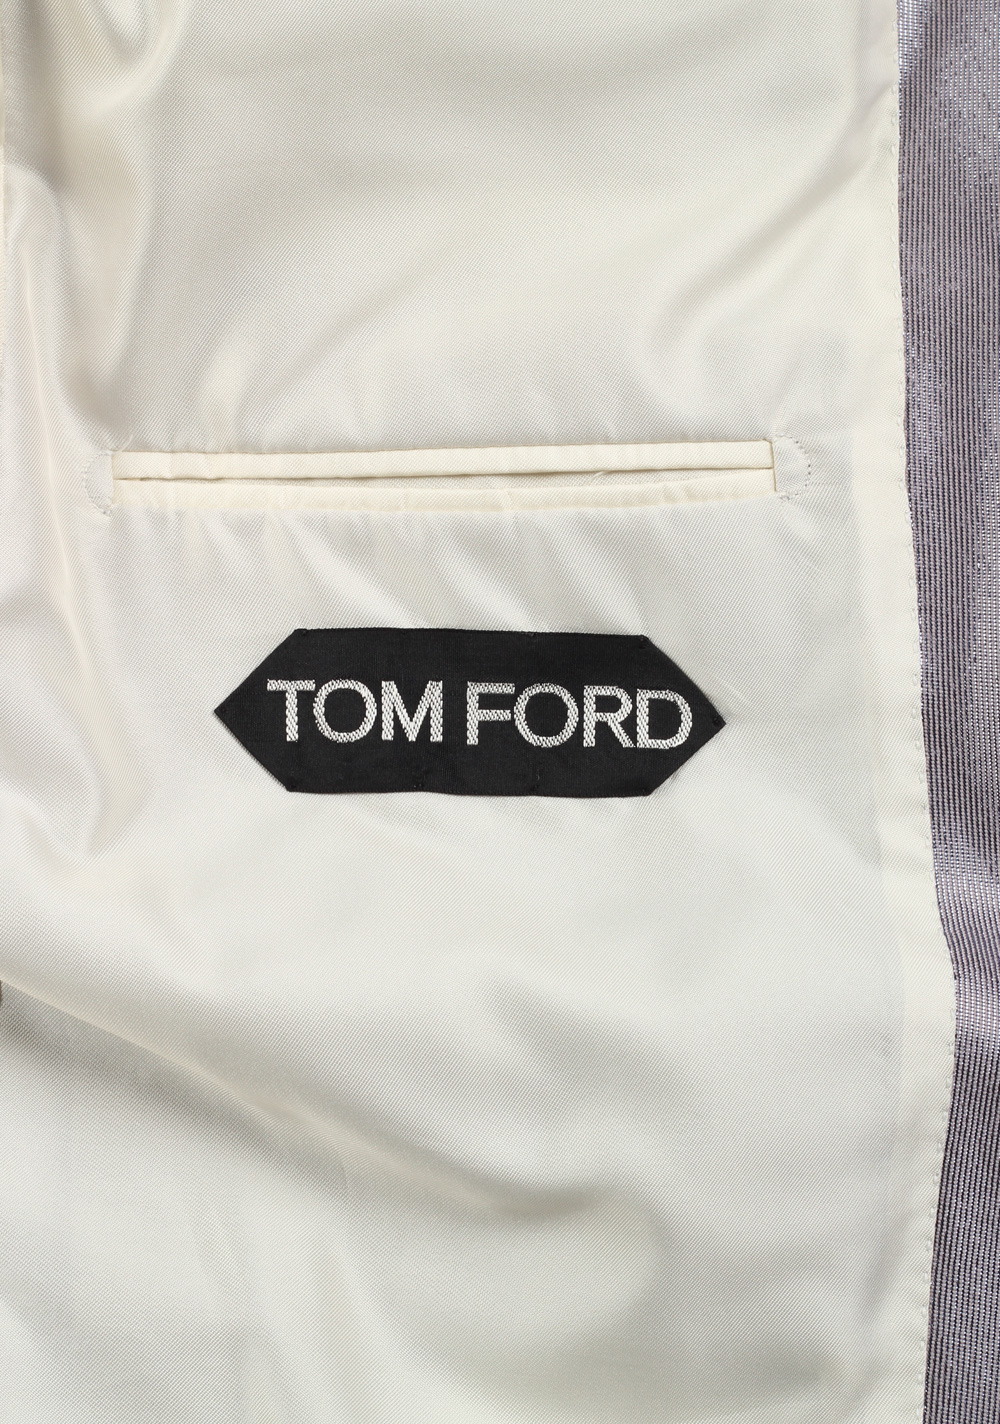 TOM FORD Windsor Gray Shawl Tuxedo Dinner Jacket Size 52 / 42R U.S. Fit A | Costume Limité